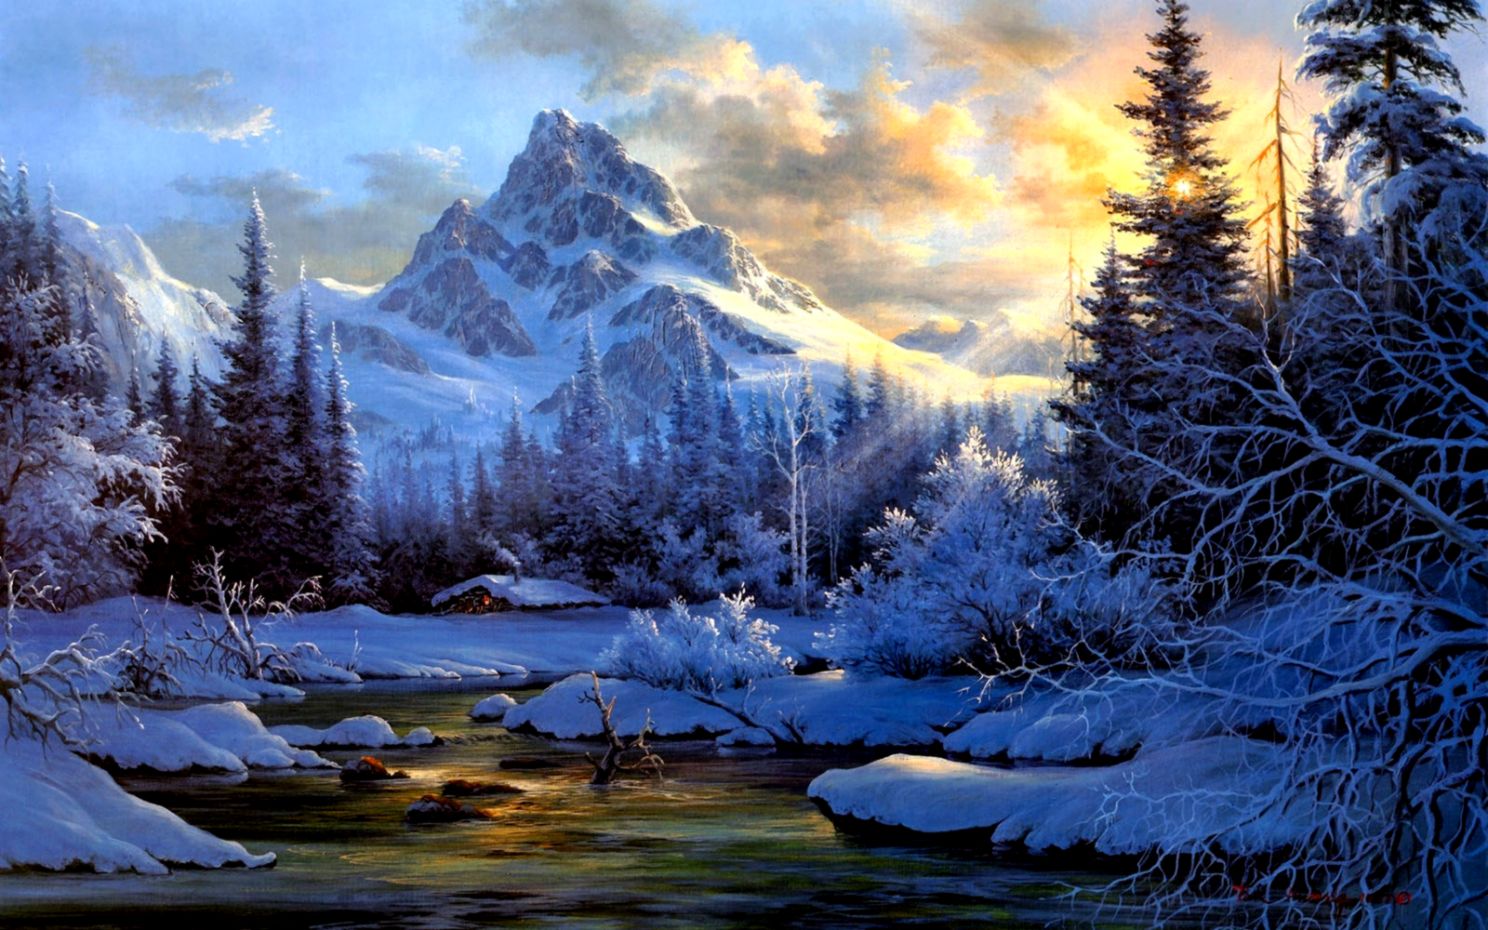 40 Mind Blowing Mountain Wallpapers For Your Desktop - Snow Covered Mountain Painting - HD Wallpaper 